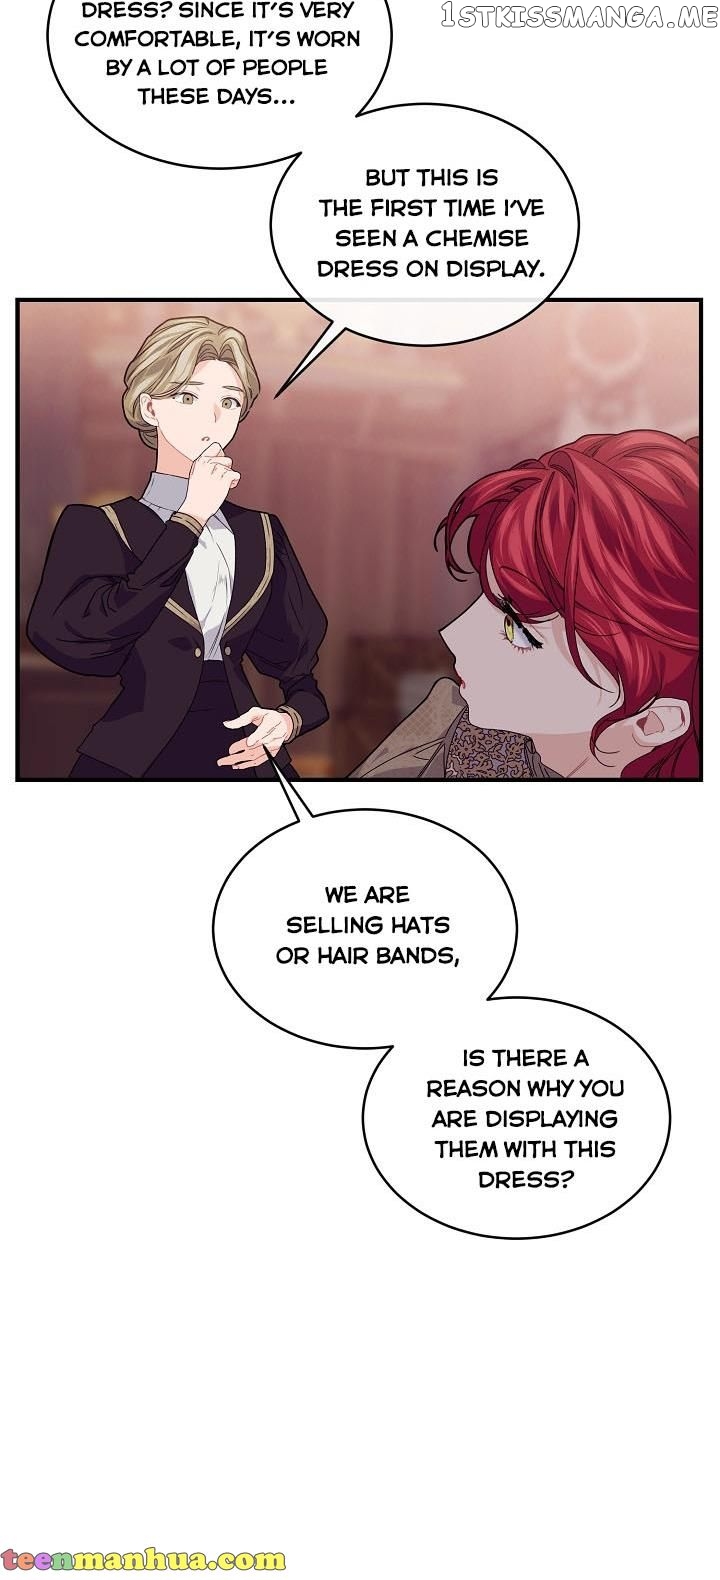 The Elegant Sea of Savagery  - page 18